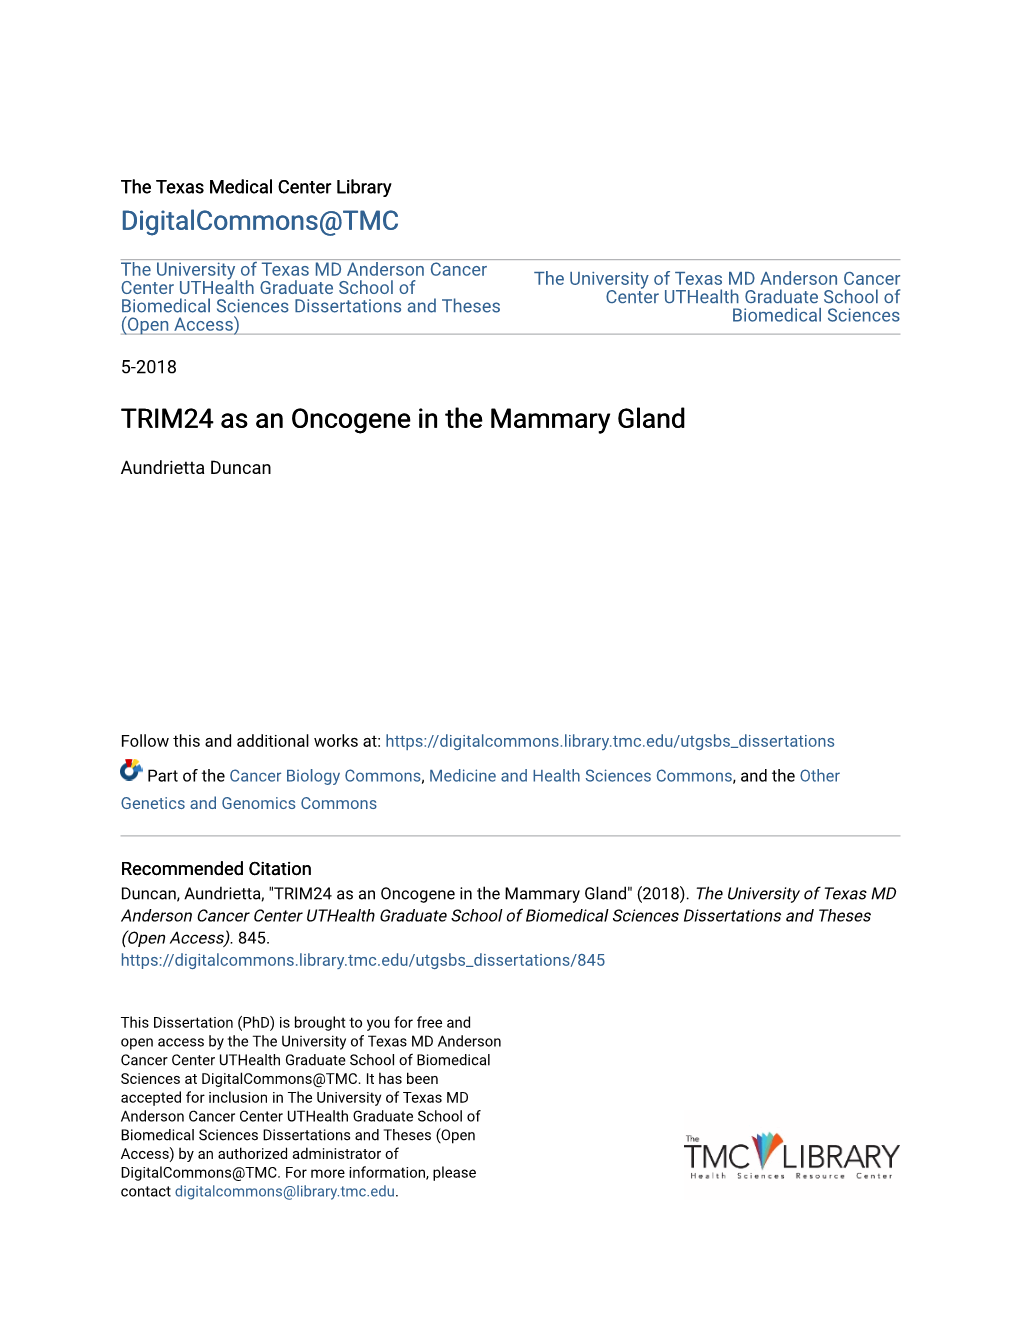 TRIM24 As an Oncogene in the Mammary Gland